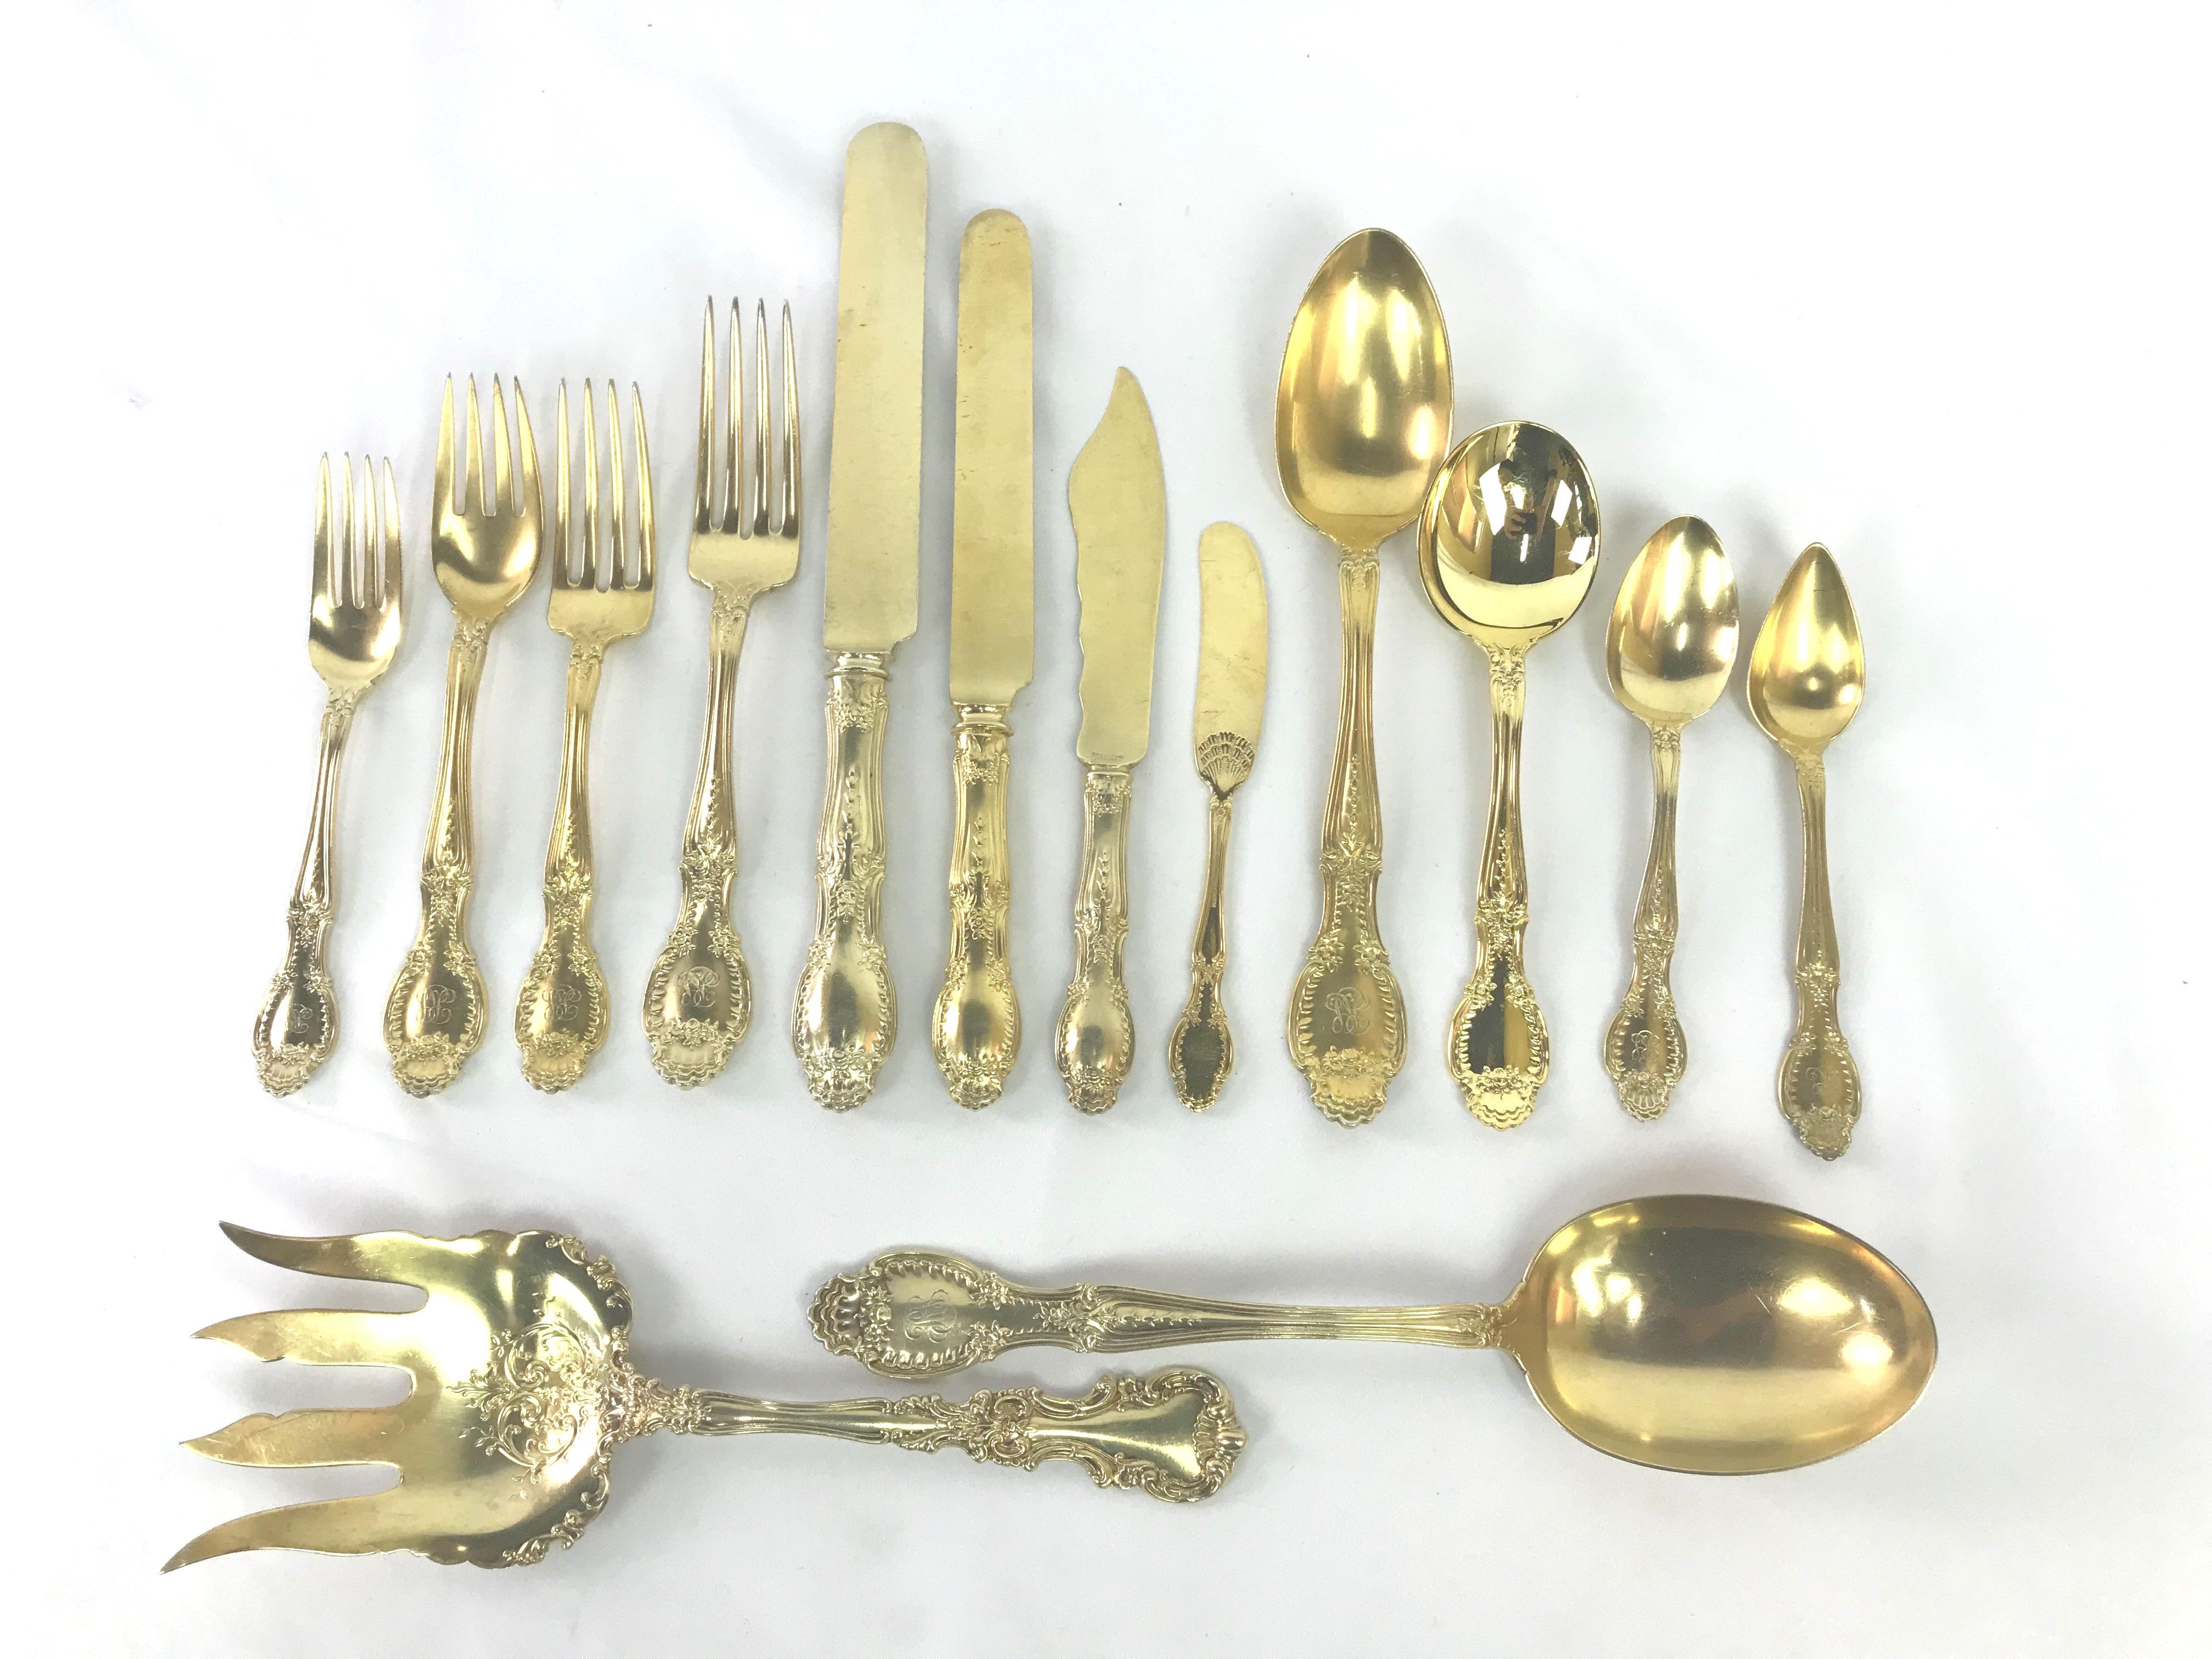 Late 19th Century Richelieu Gold Vermeil by Tiffany Sterling Silver Flatware, 196 Pieces